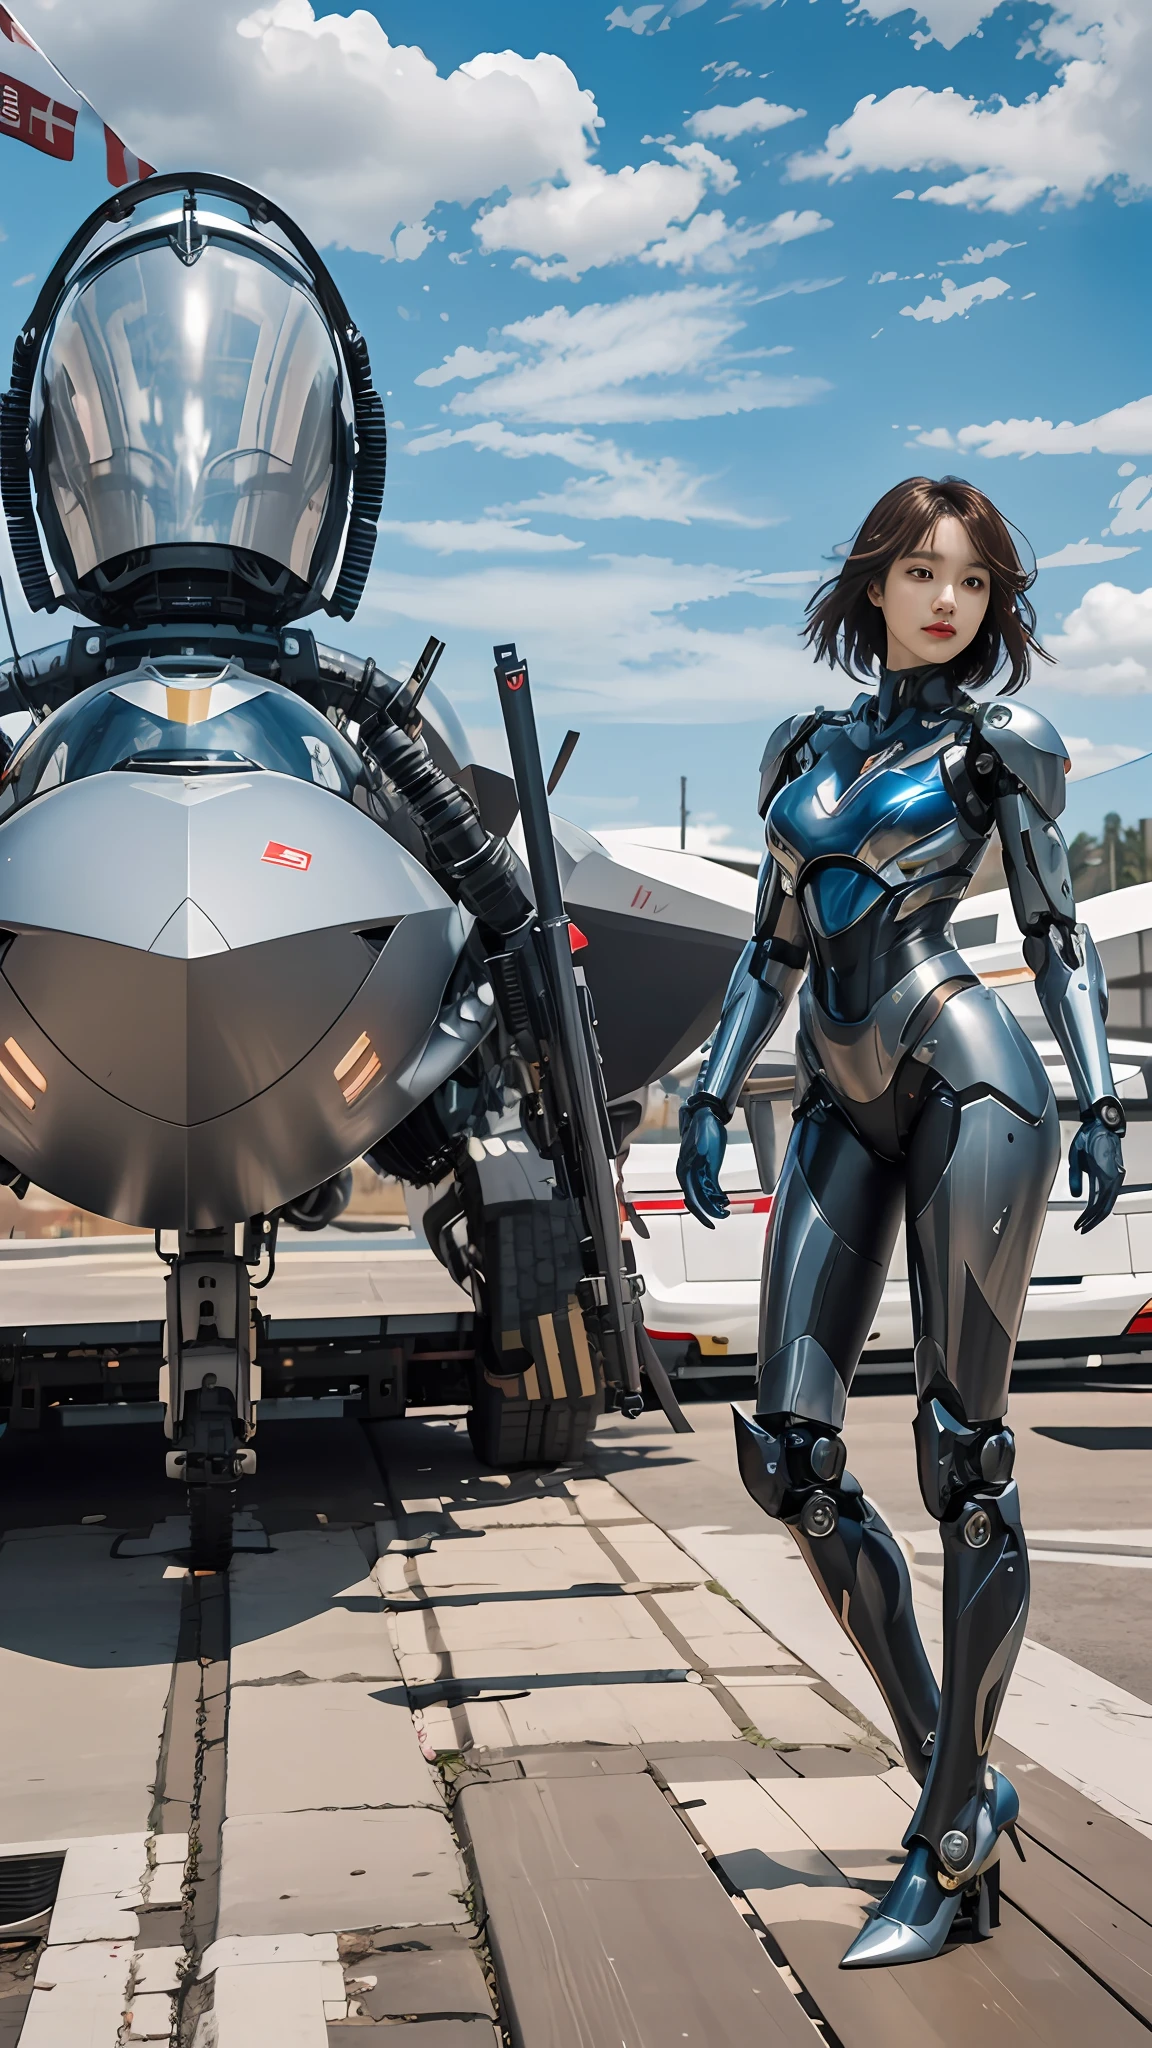 Woman in futuristic suit standing next to a fighter, girl in mecha cyber armor, girl wearing robotic suit, female mecha, Battle Angel, pacific-rim-mech in background, clothed in sci-fi military armor, Mecha suit, iu lee ji-eun as a super villain, park shin hye as a super villain, cyber suit, Armor Girl